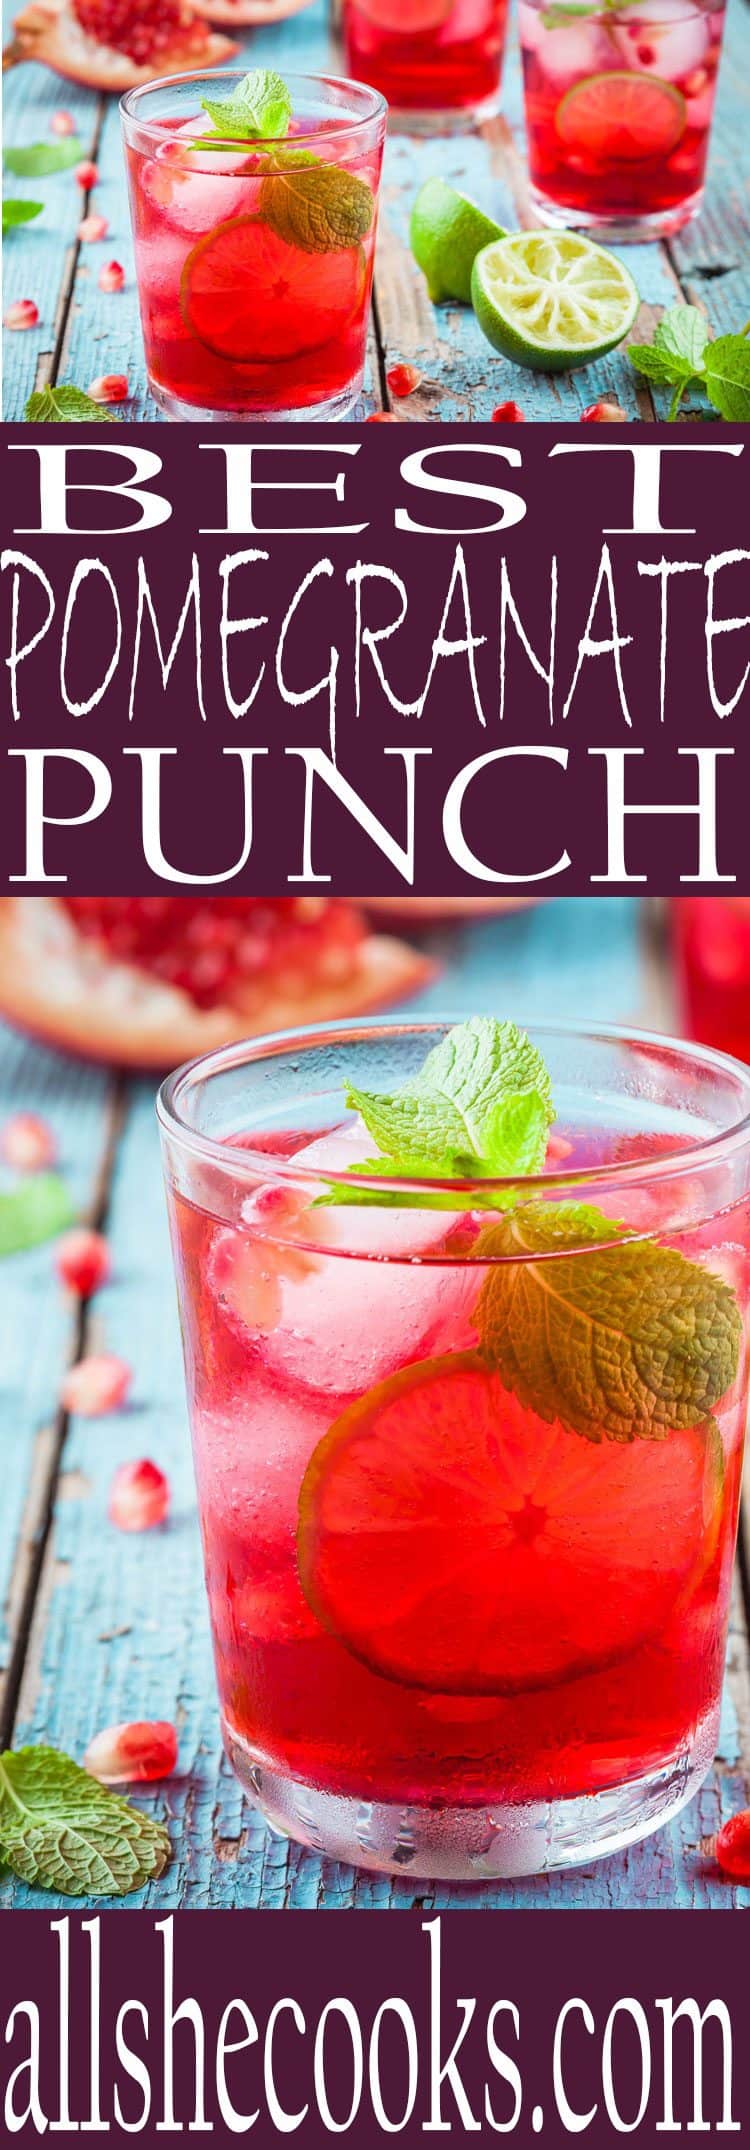 Mix up this easy Pomegranate Punch Recipe is easy to whip up and perfect for an easy party drink recipe.